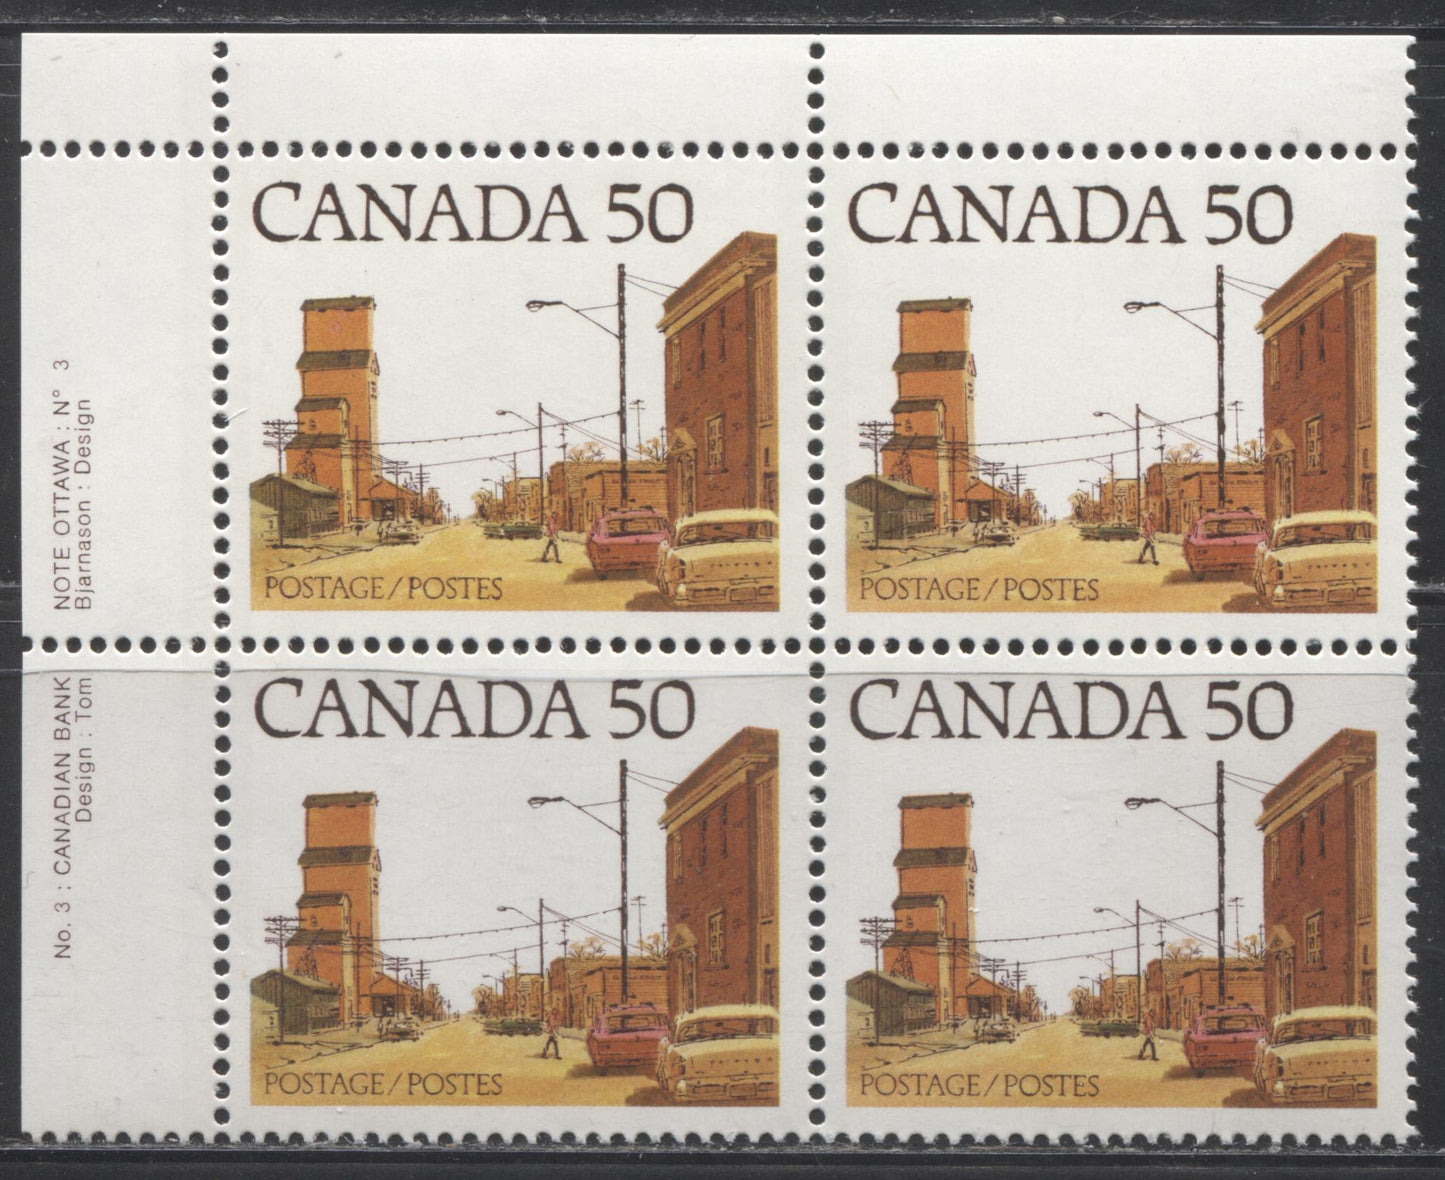 Canada #723Aiii 50c Multicoloured Prairie Street Scene, 1977-1982 Floral & Environment Issue, a VFNH UL Plate 3 Block of the DF/DF Paper, Showing the "Dented Bumper" Variety on Positions 6 and 7, With Hollow Dot on Position 7, Red Brown Building at Right